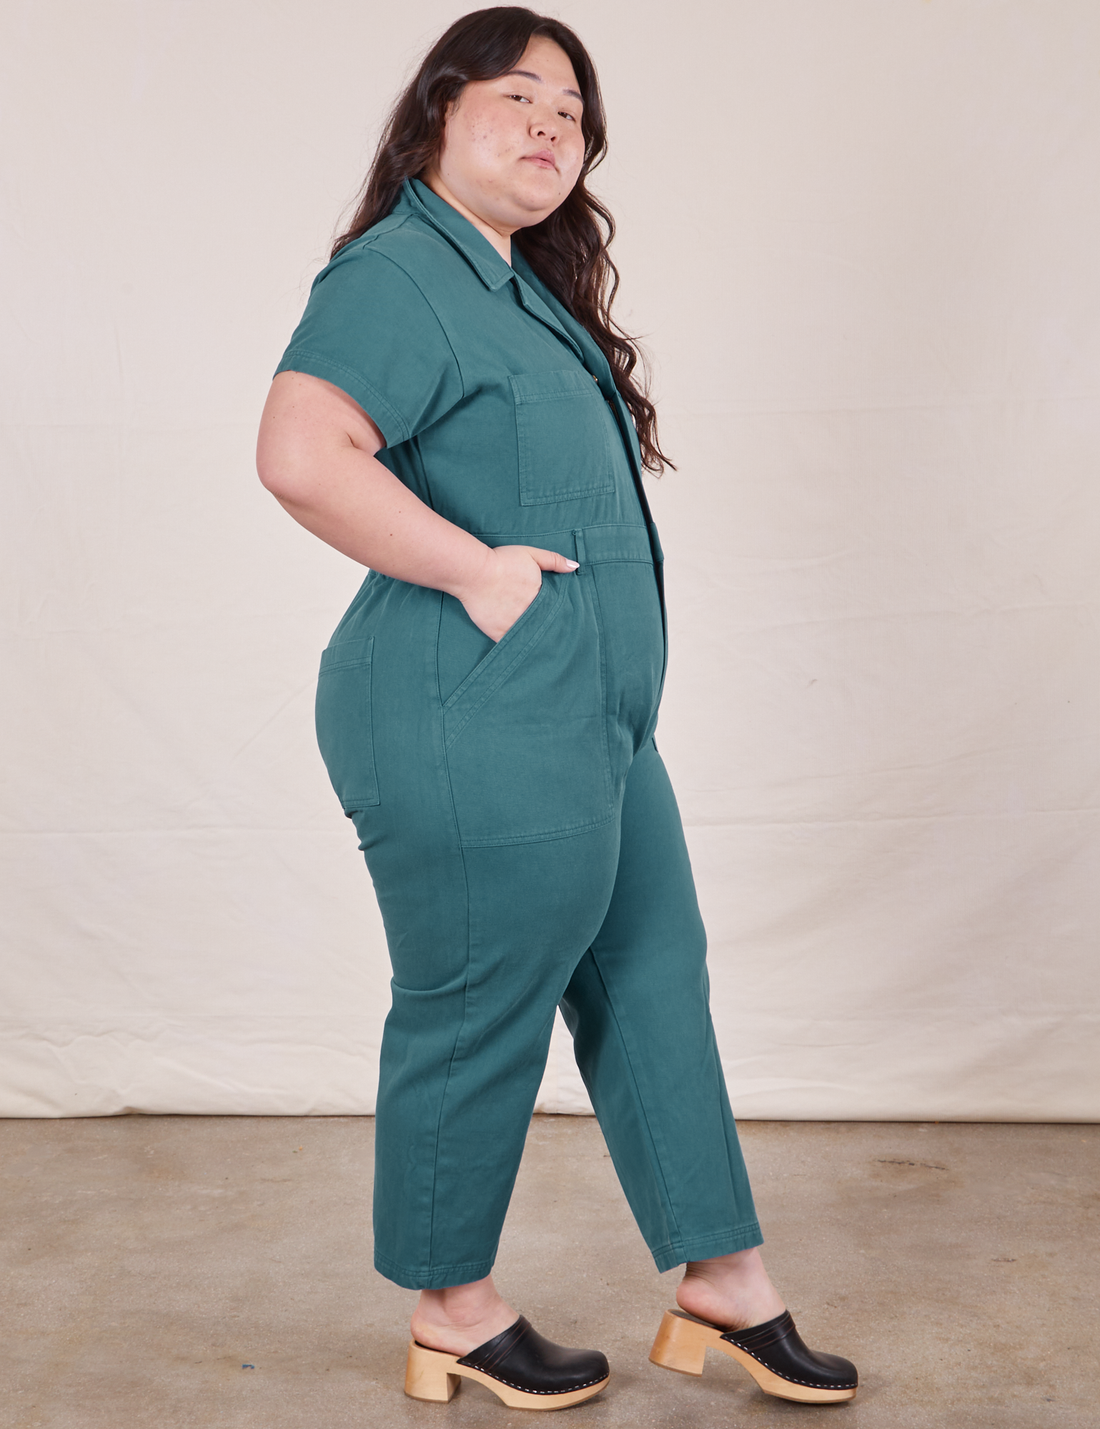 Petite Short Sleeve Jumpsuit in Marine Blue side view on Ashley